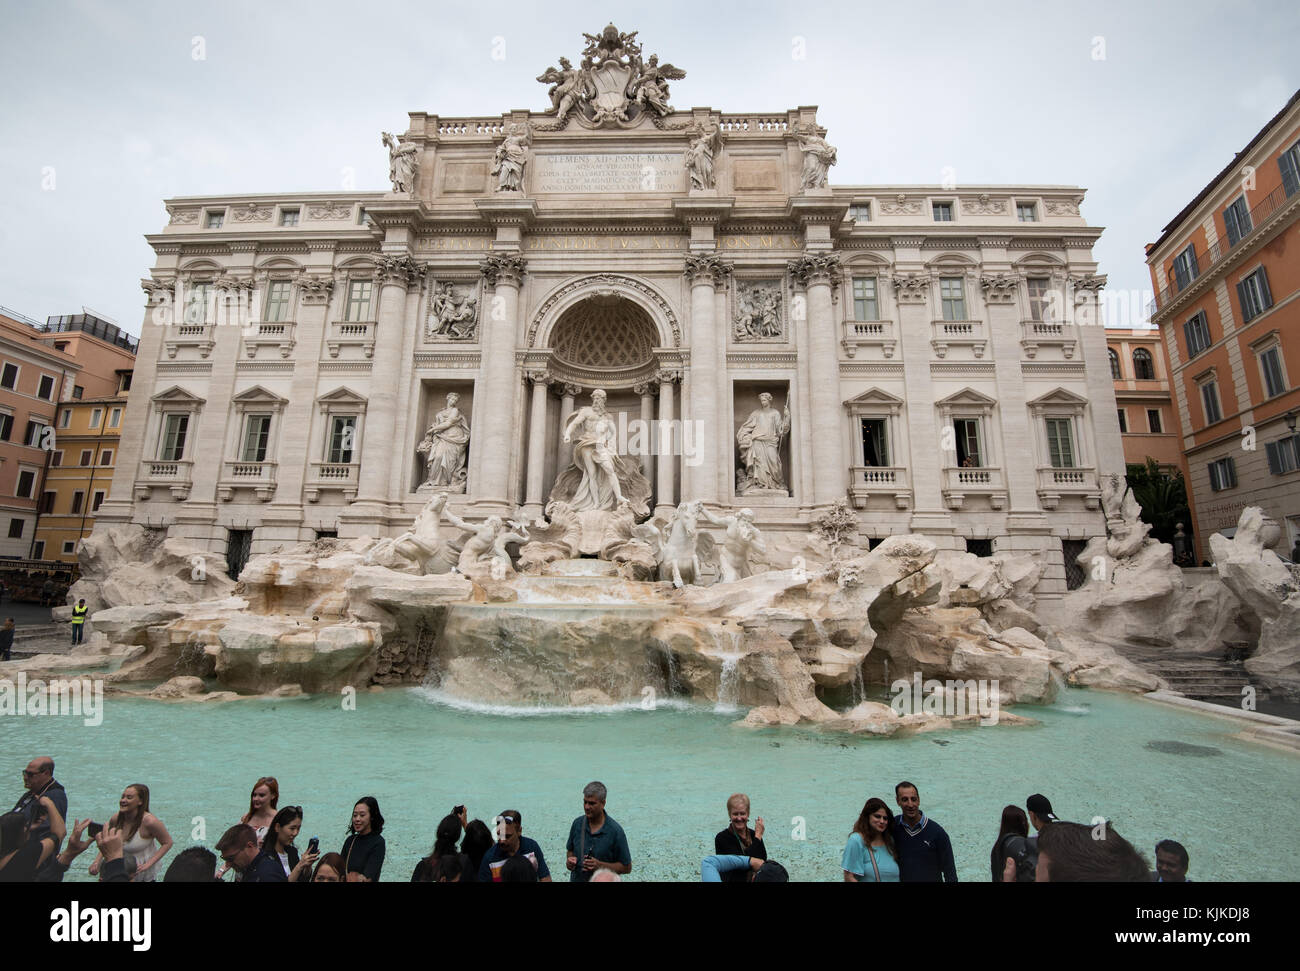 Rome, Italy - October 1 2017: Tourists in front of  The Trevi Fountain, or Fontana di Trevi, the largest and most famous Baroque fountain in Europe Stock Photo